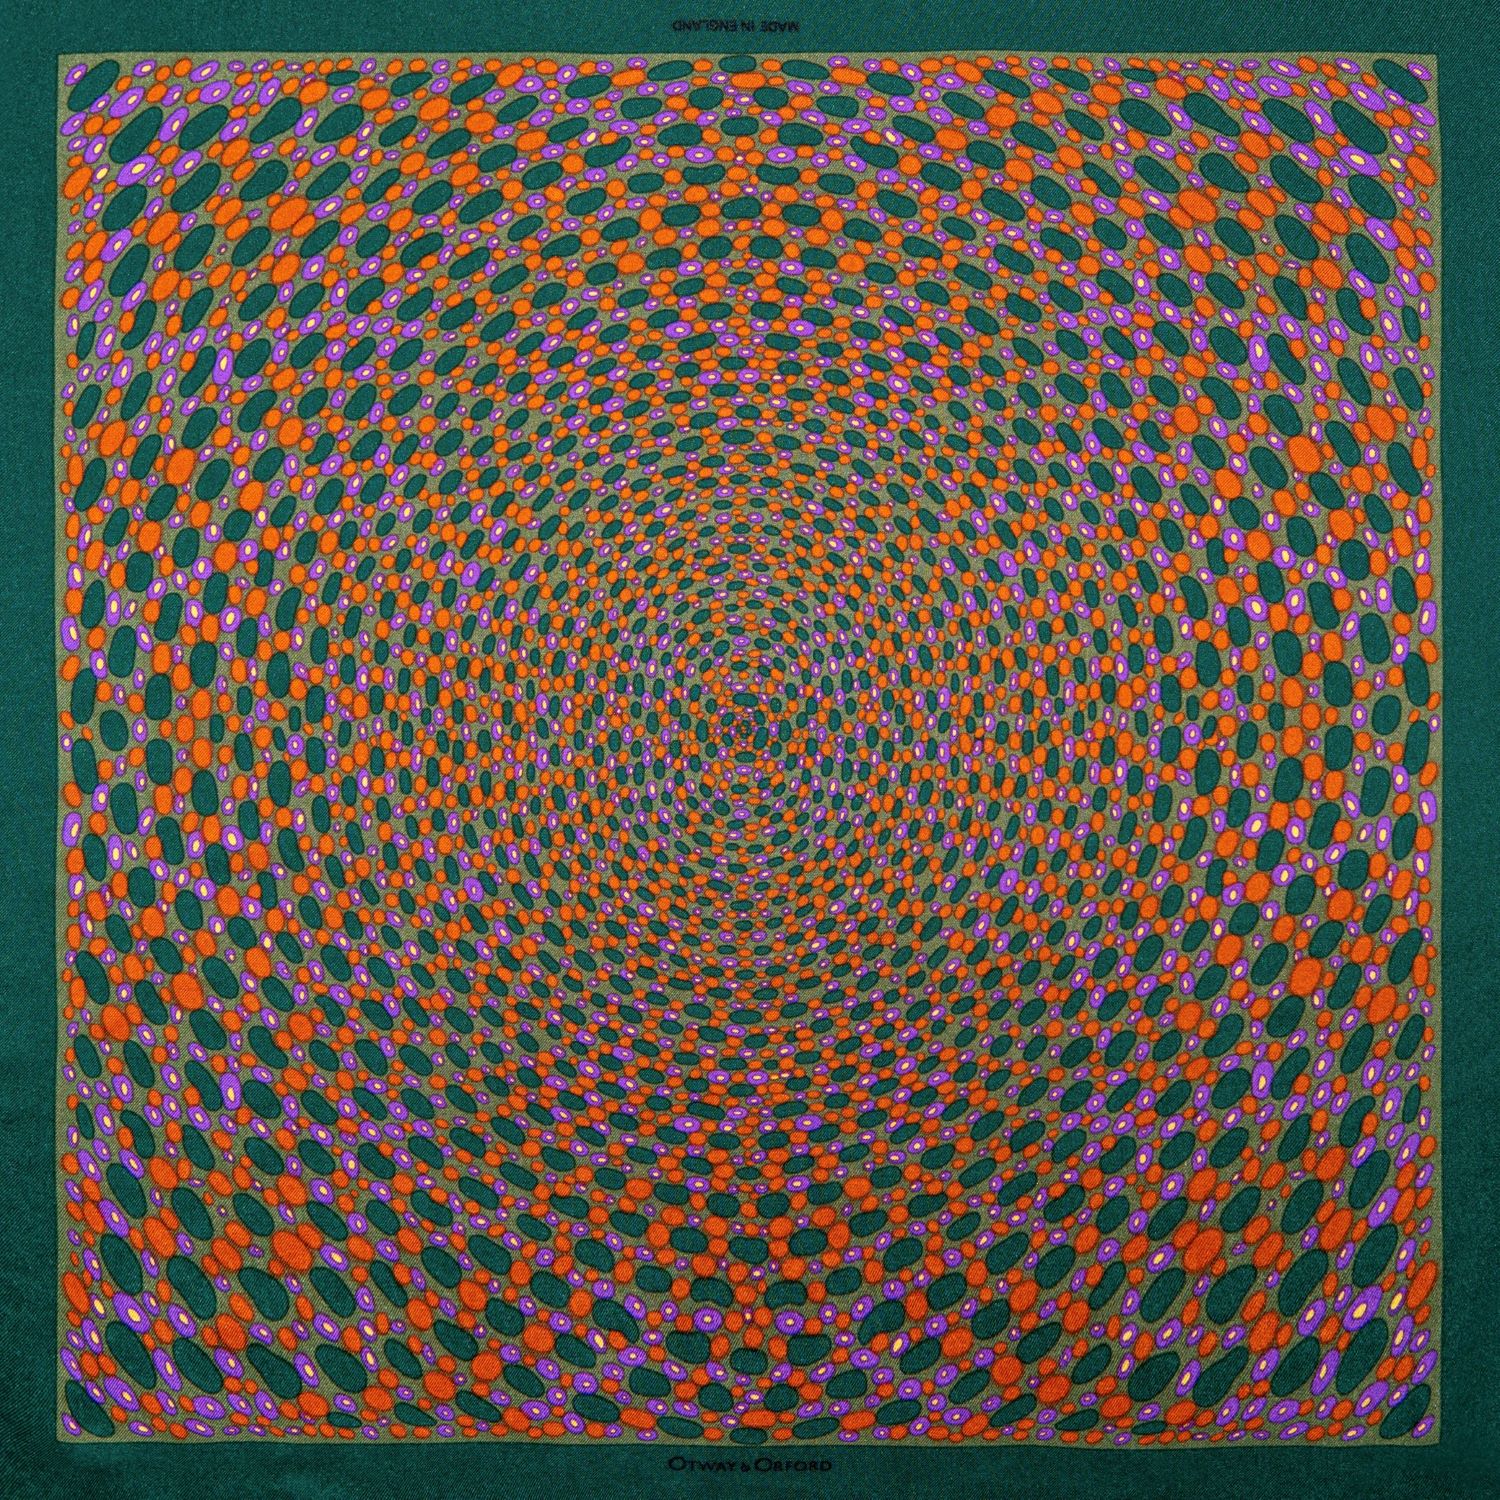 Men’s Green / Pink / Purple ’Infinity’ Spotted Silk Pocket Square In Green, Orange & Purple. Full-Size. Otway & Orford